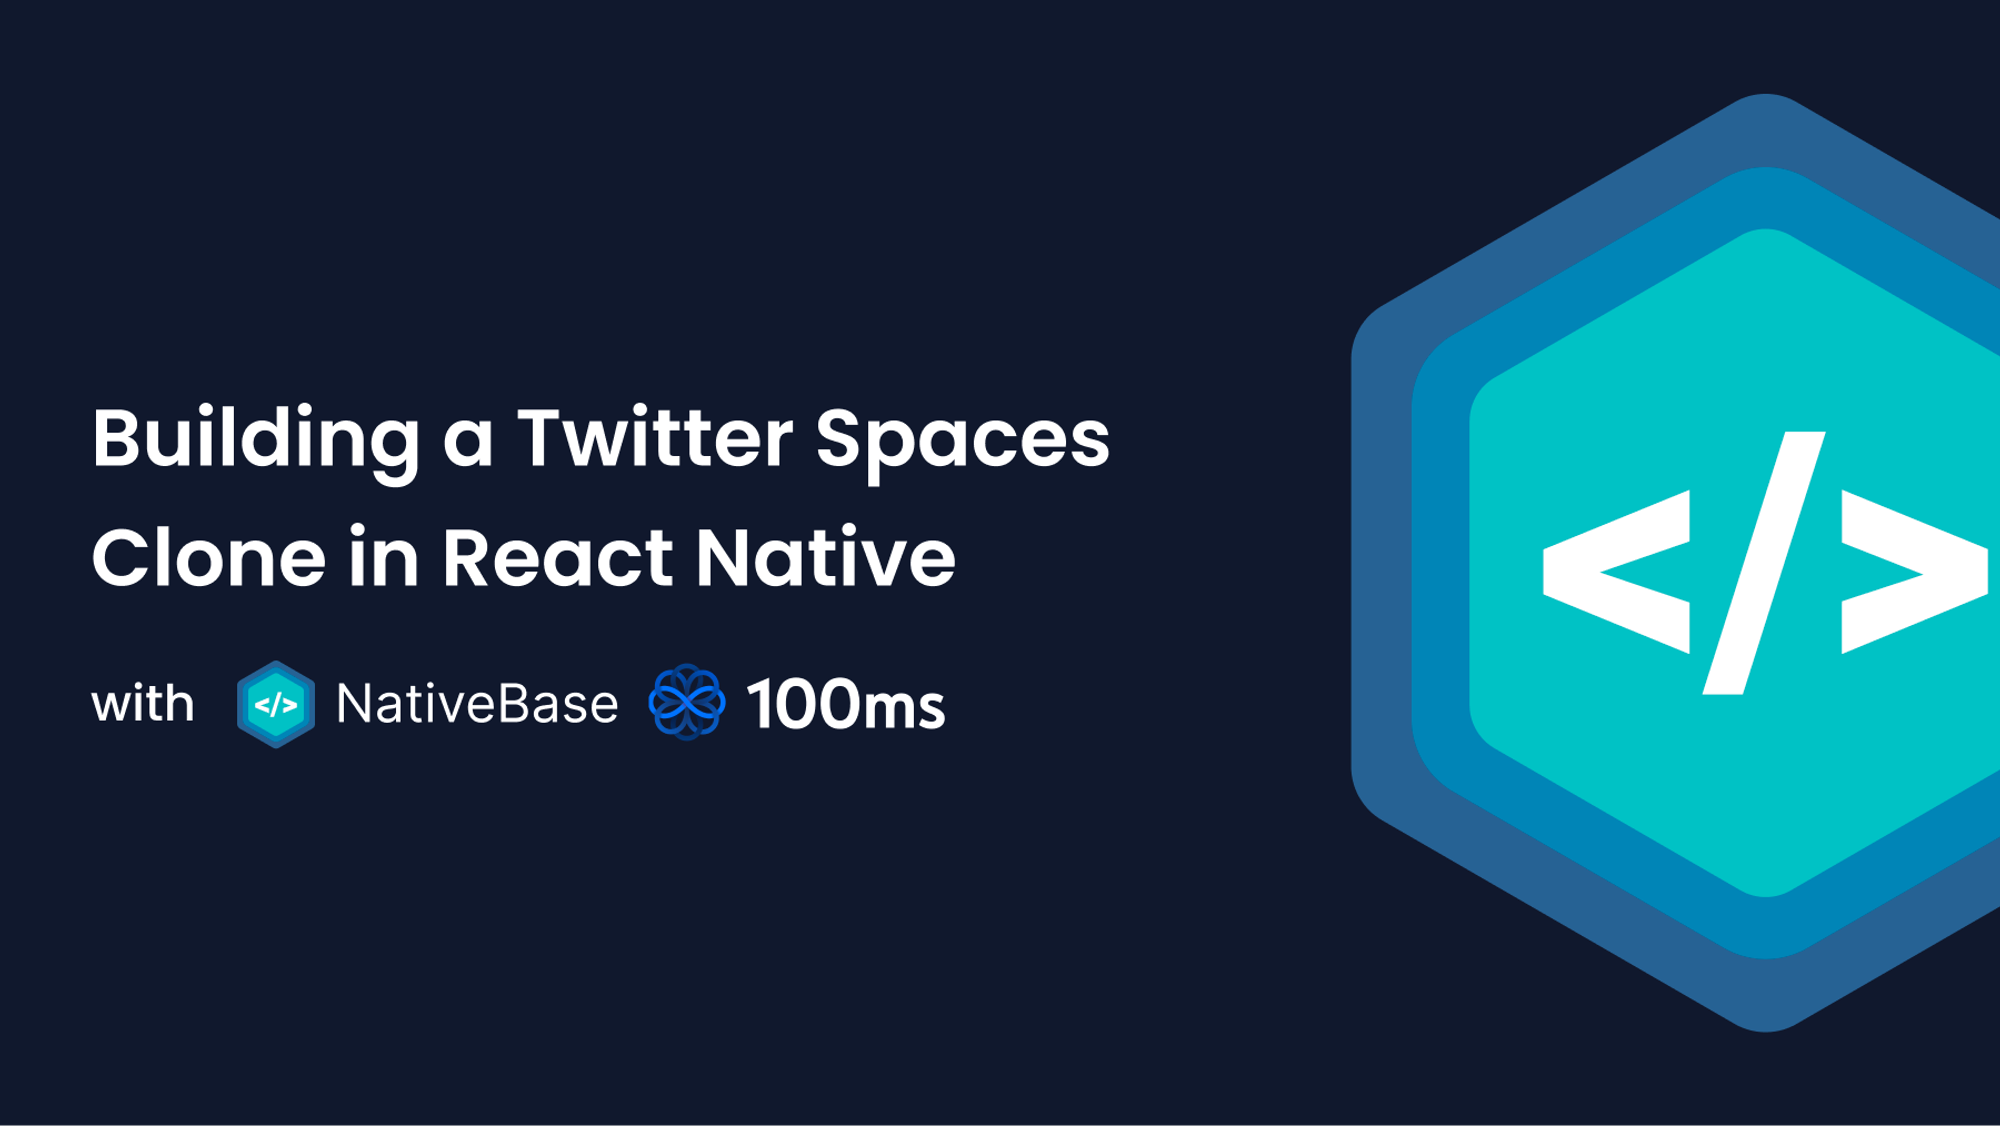 Building a Twitter Spaces Clone with NativeBase and 100ms